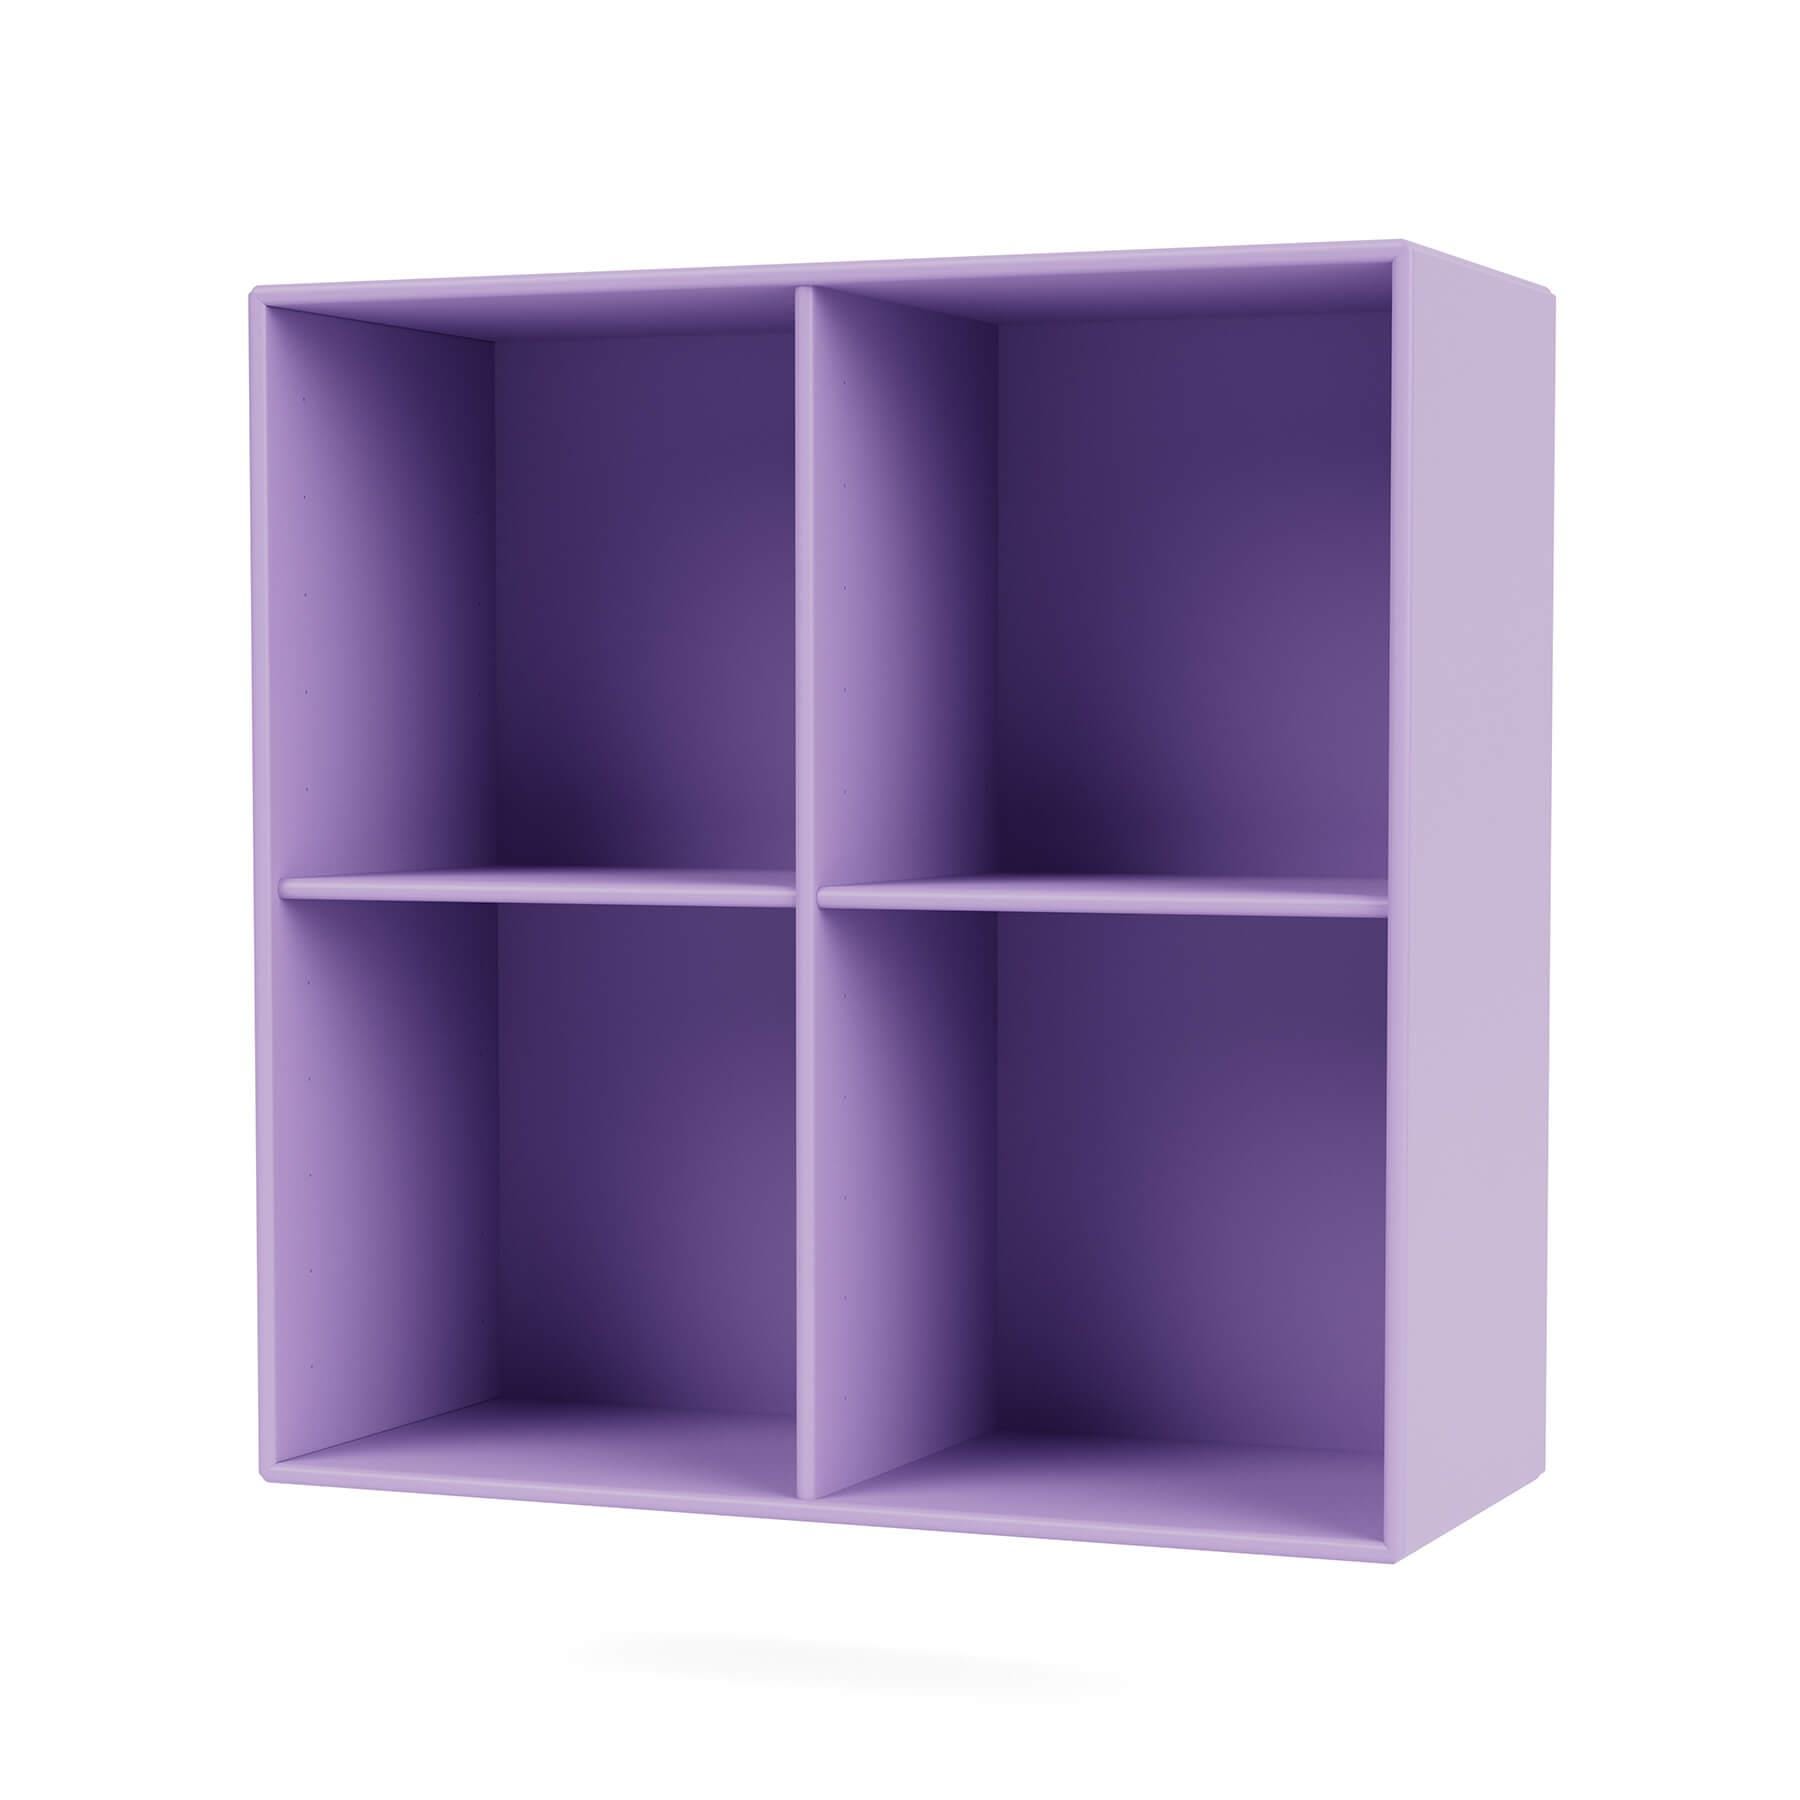 Montana Show Bookcase Iris Wall Mounted Purple Designer Furniture From Holloways Of Ludlow